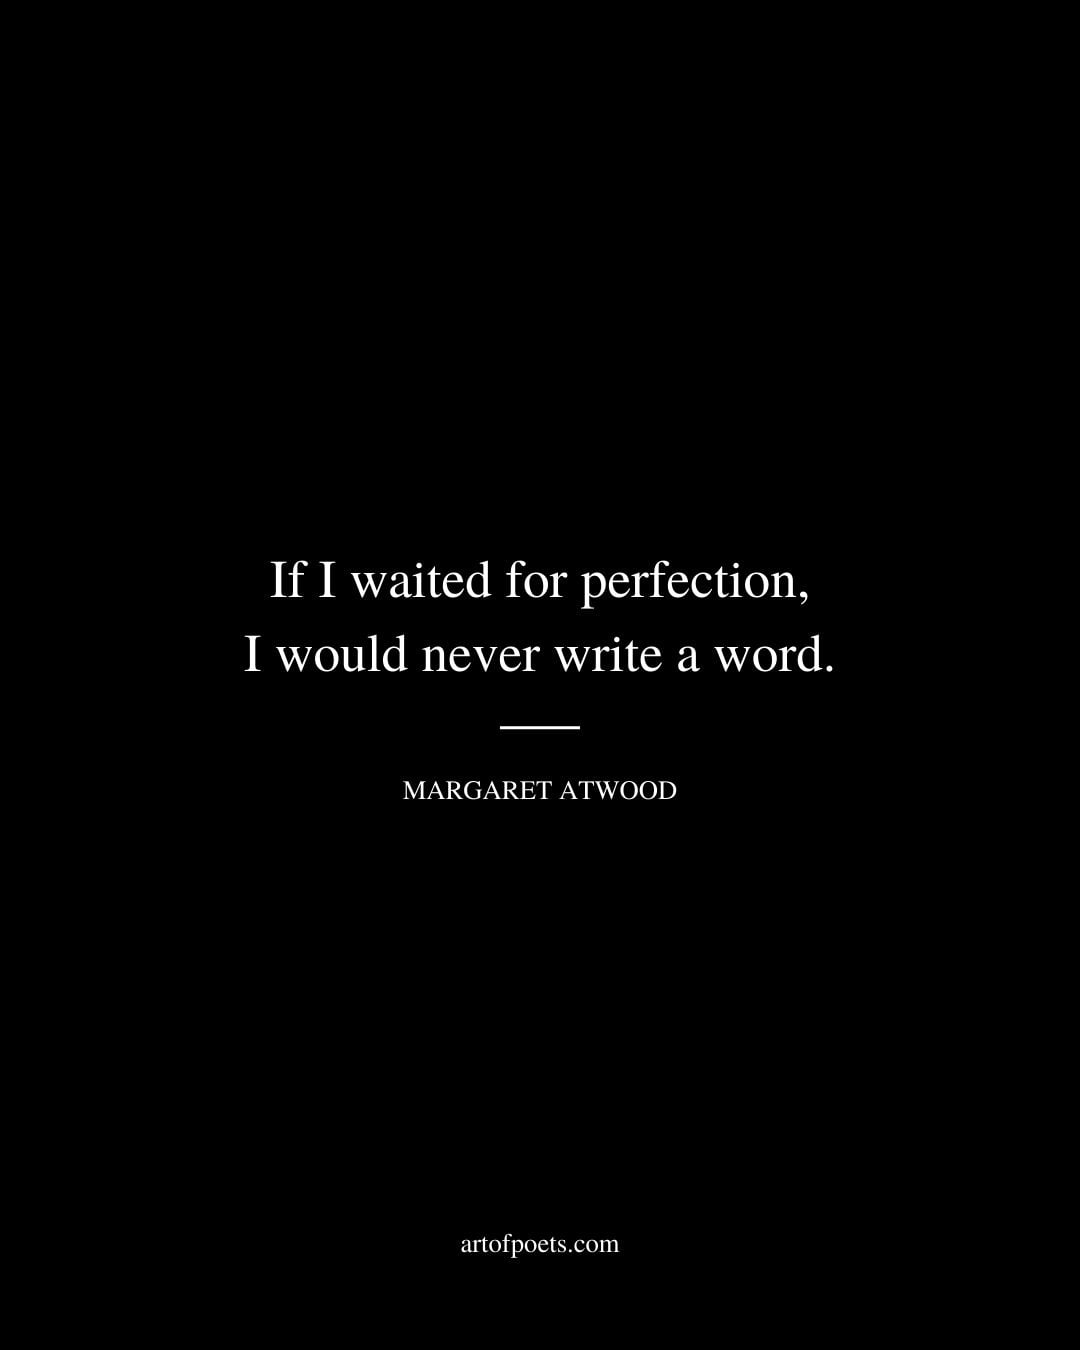 If I waited for perfection… I would never write a word